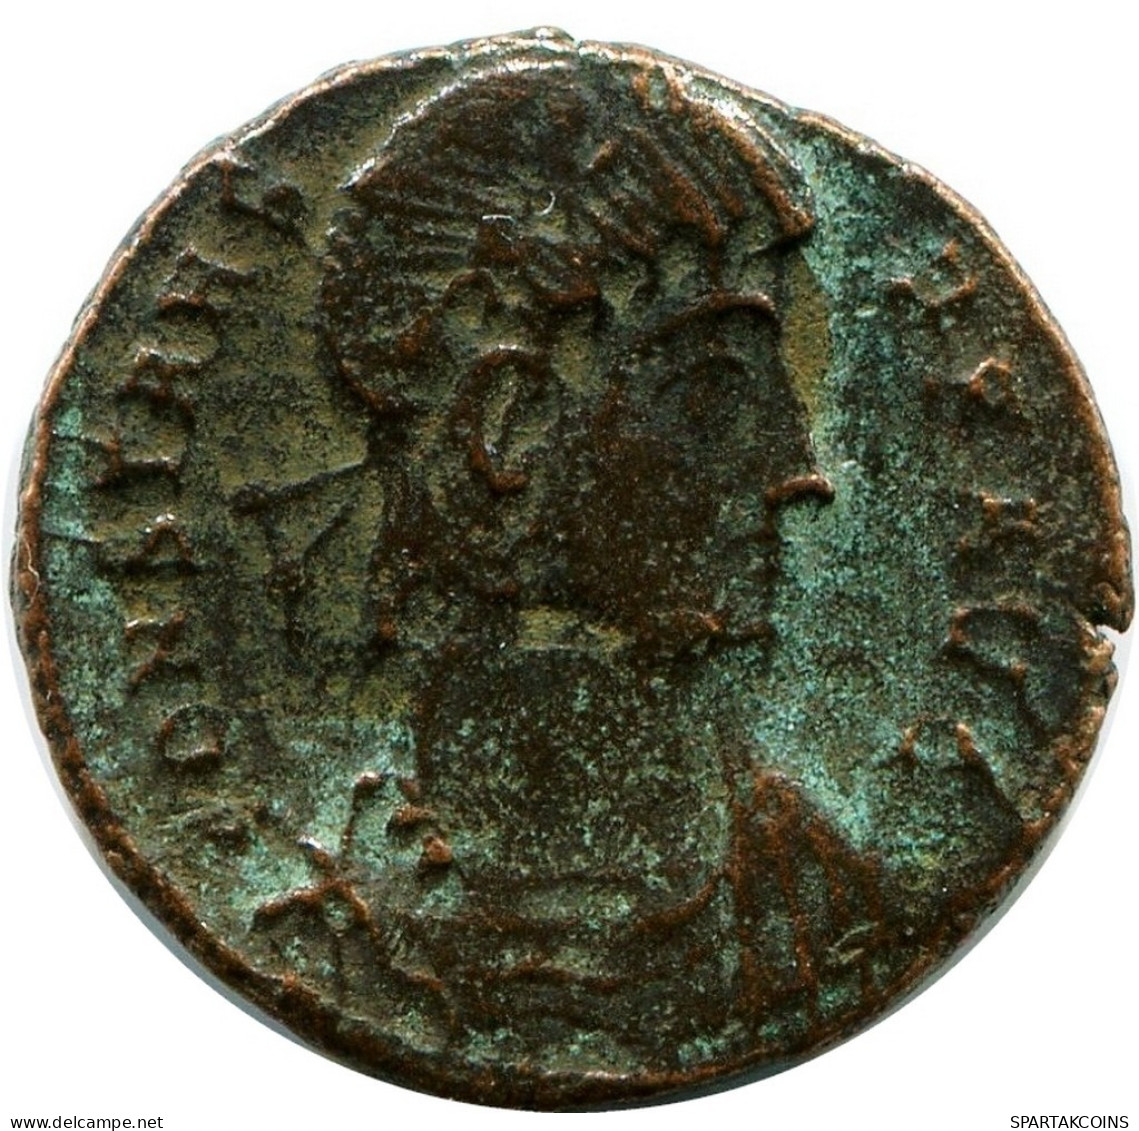 CONSTANS MINTED IN THESSALONICA FOUND IN IHNASYAH HOARD EGYPT #ANC11895.14.E.A - El Imperio Christiano (307 / 363)